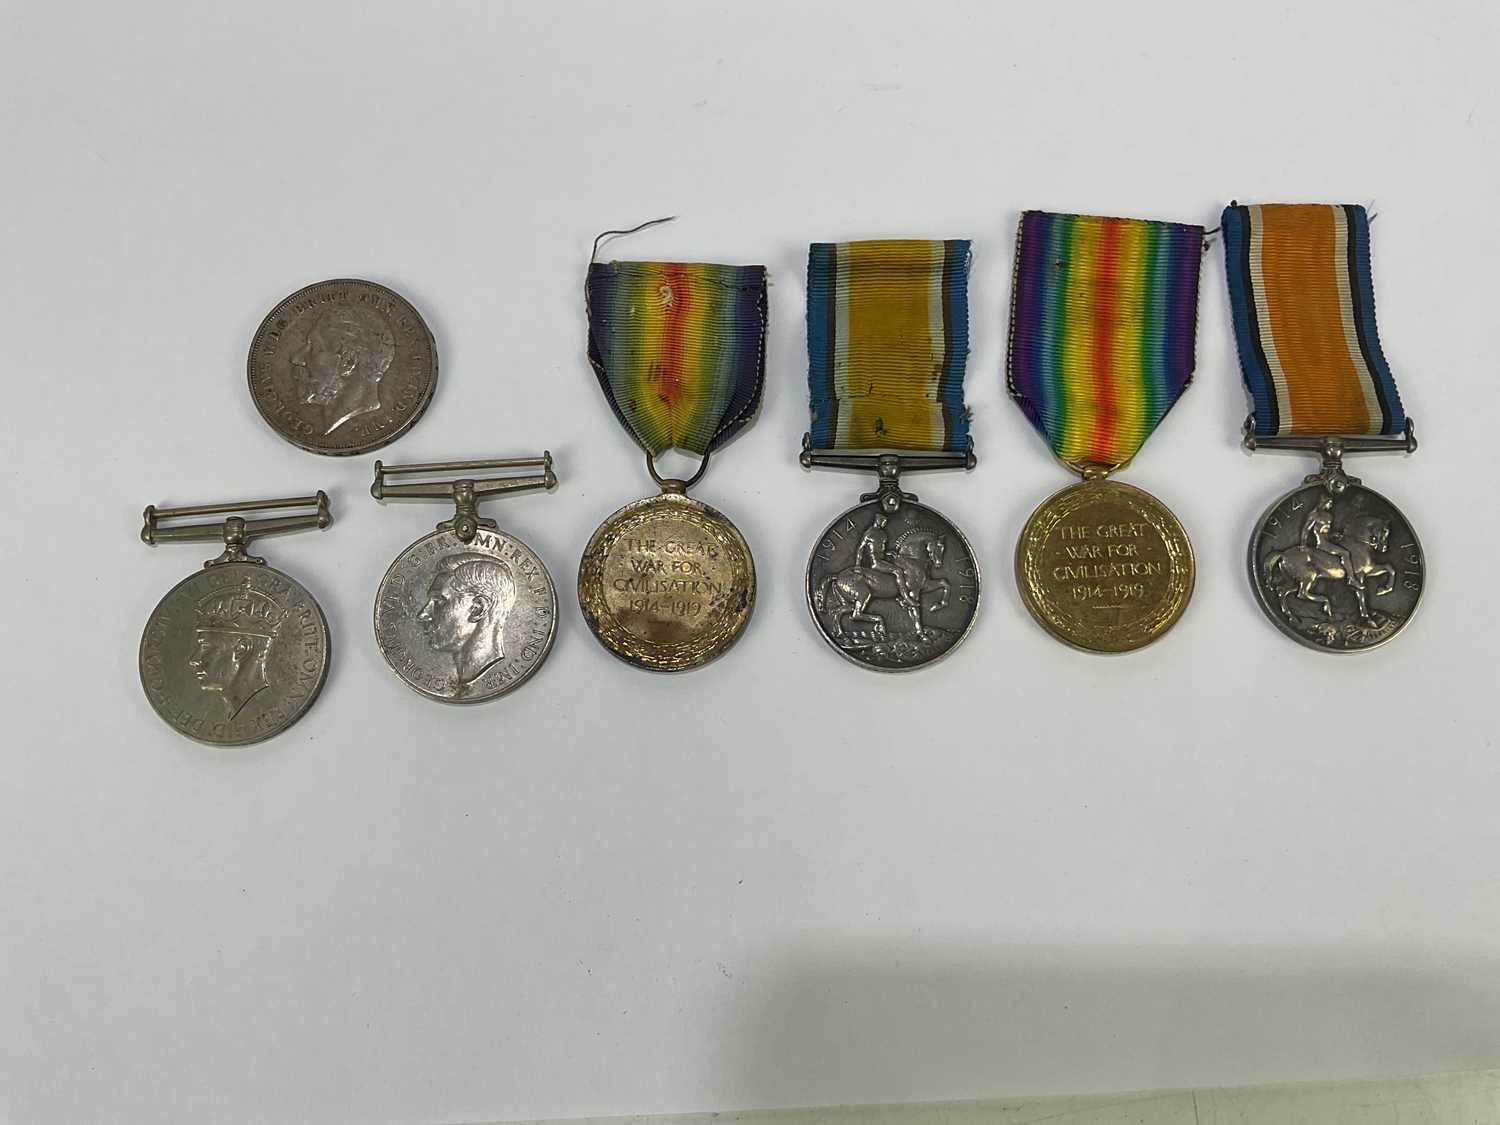 A WWI medal pair awarded to 6068 Pte J.J. Wills, 6 Lond.R., with a further WWI medal pair awarded - Image 2 of 2